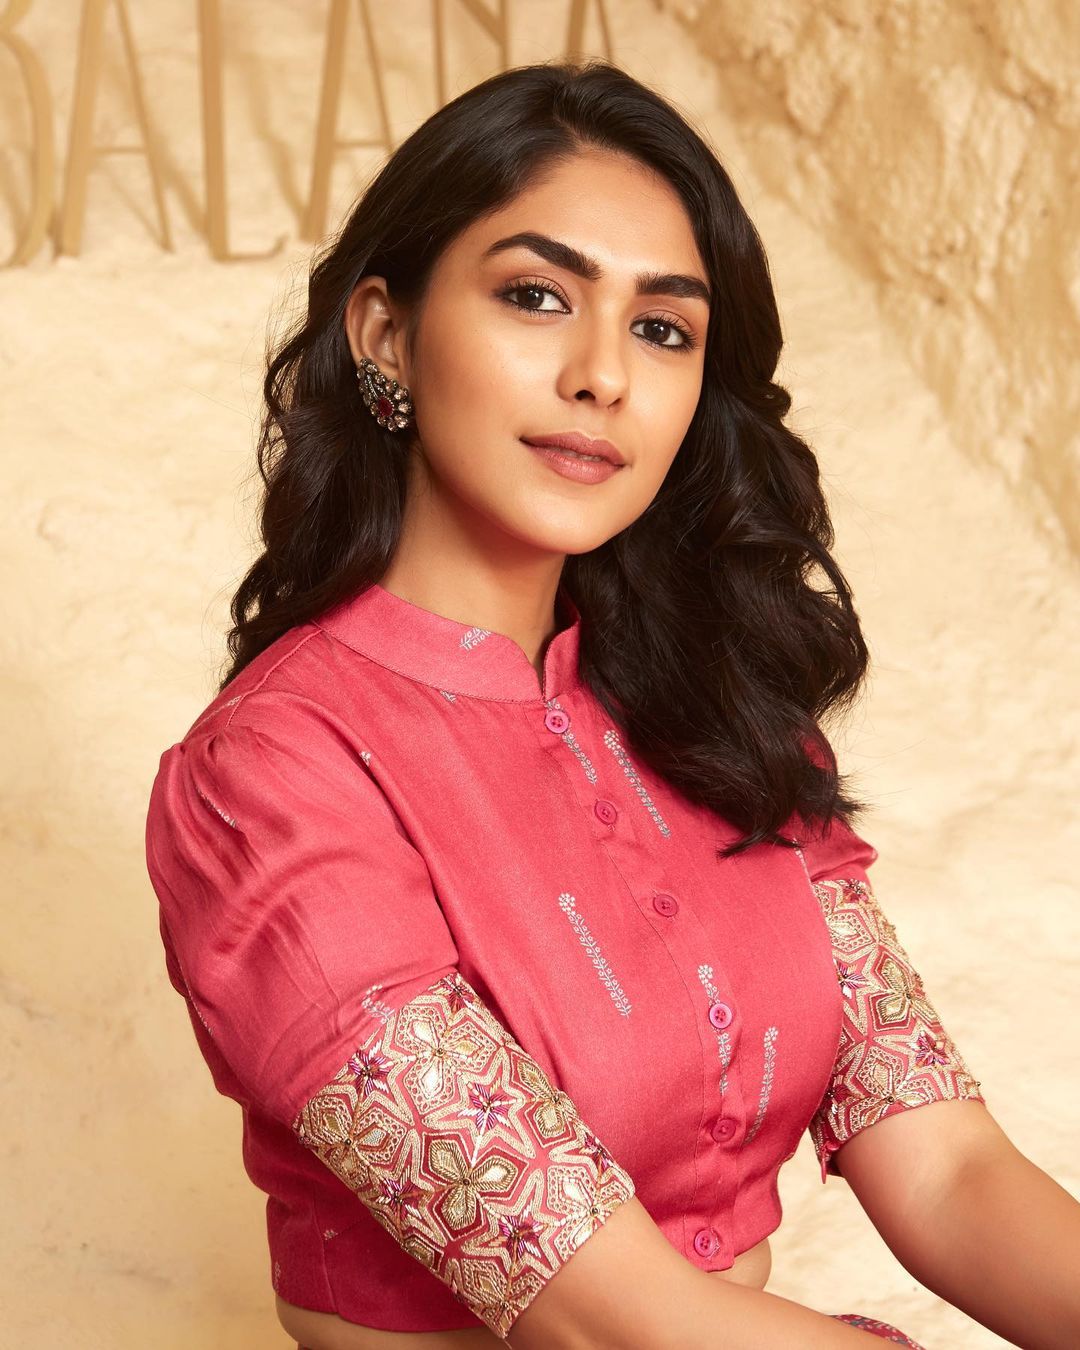 Bollywood actress mrunal thakur hot photo gallery photos hd images pictures stills first look posters of bollywood actress mrunal thakur hot photo gallery movie